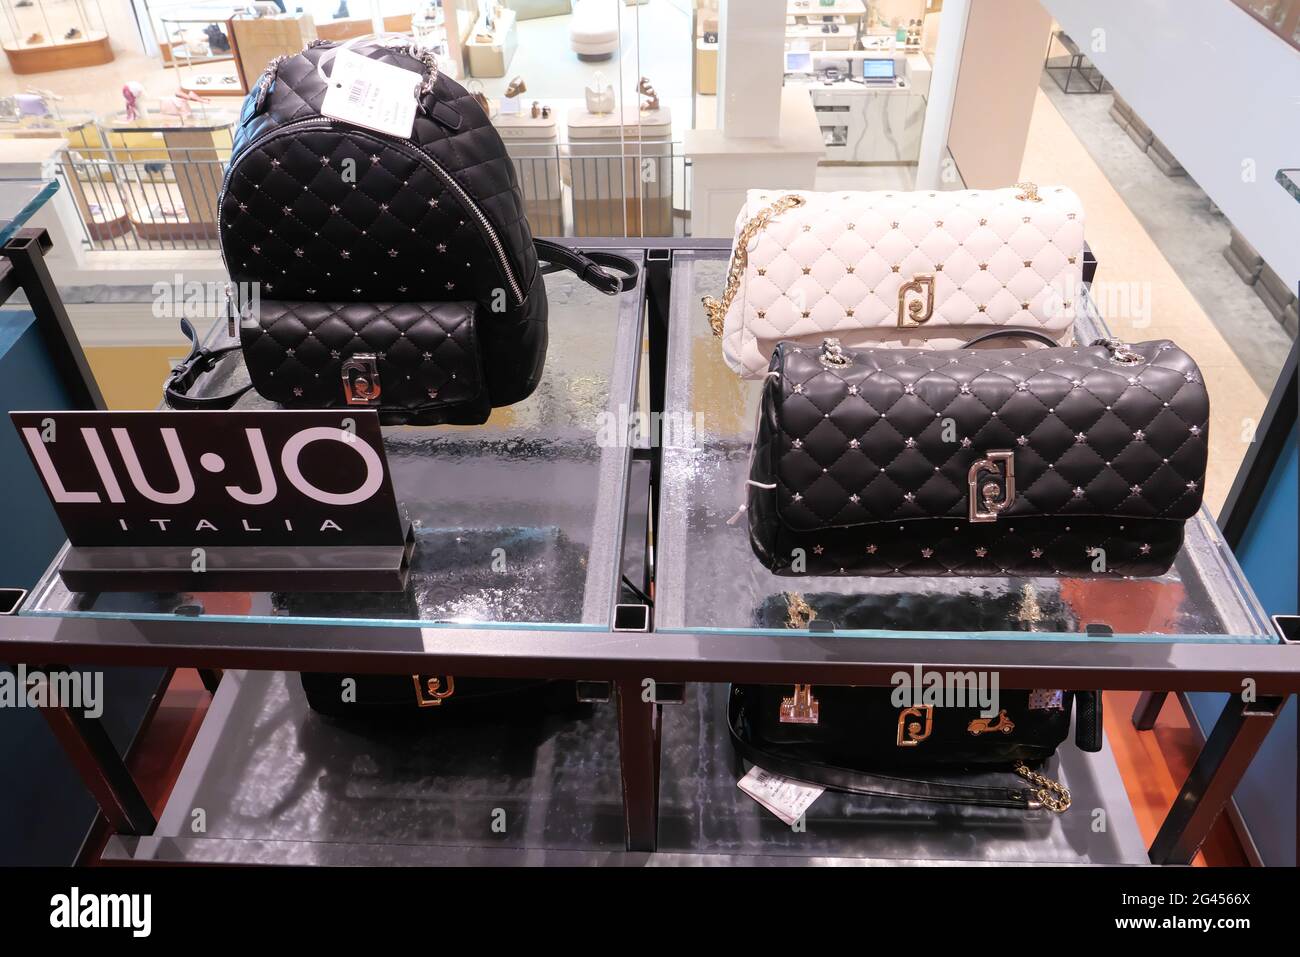 BAGS ON DISPLAY AT LIU JO BOUTIQUE INSIDE THE RINASCENTE FASHION STORE  Stock Photo - Alamy